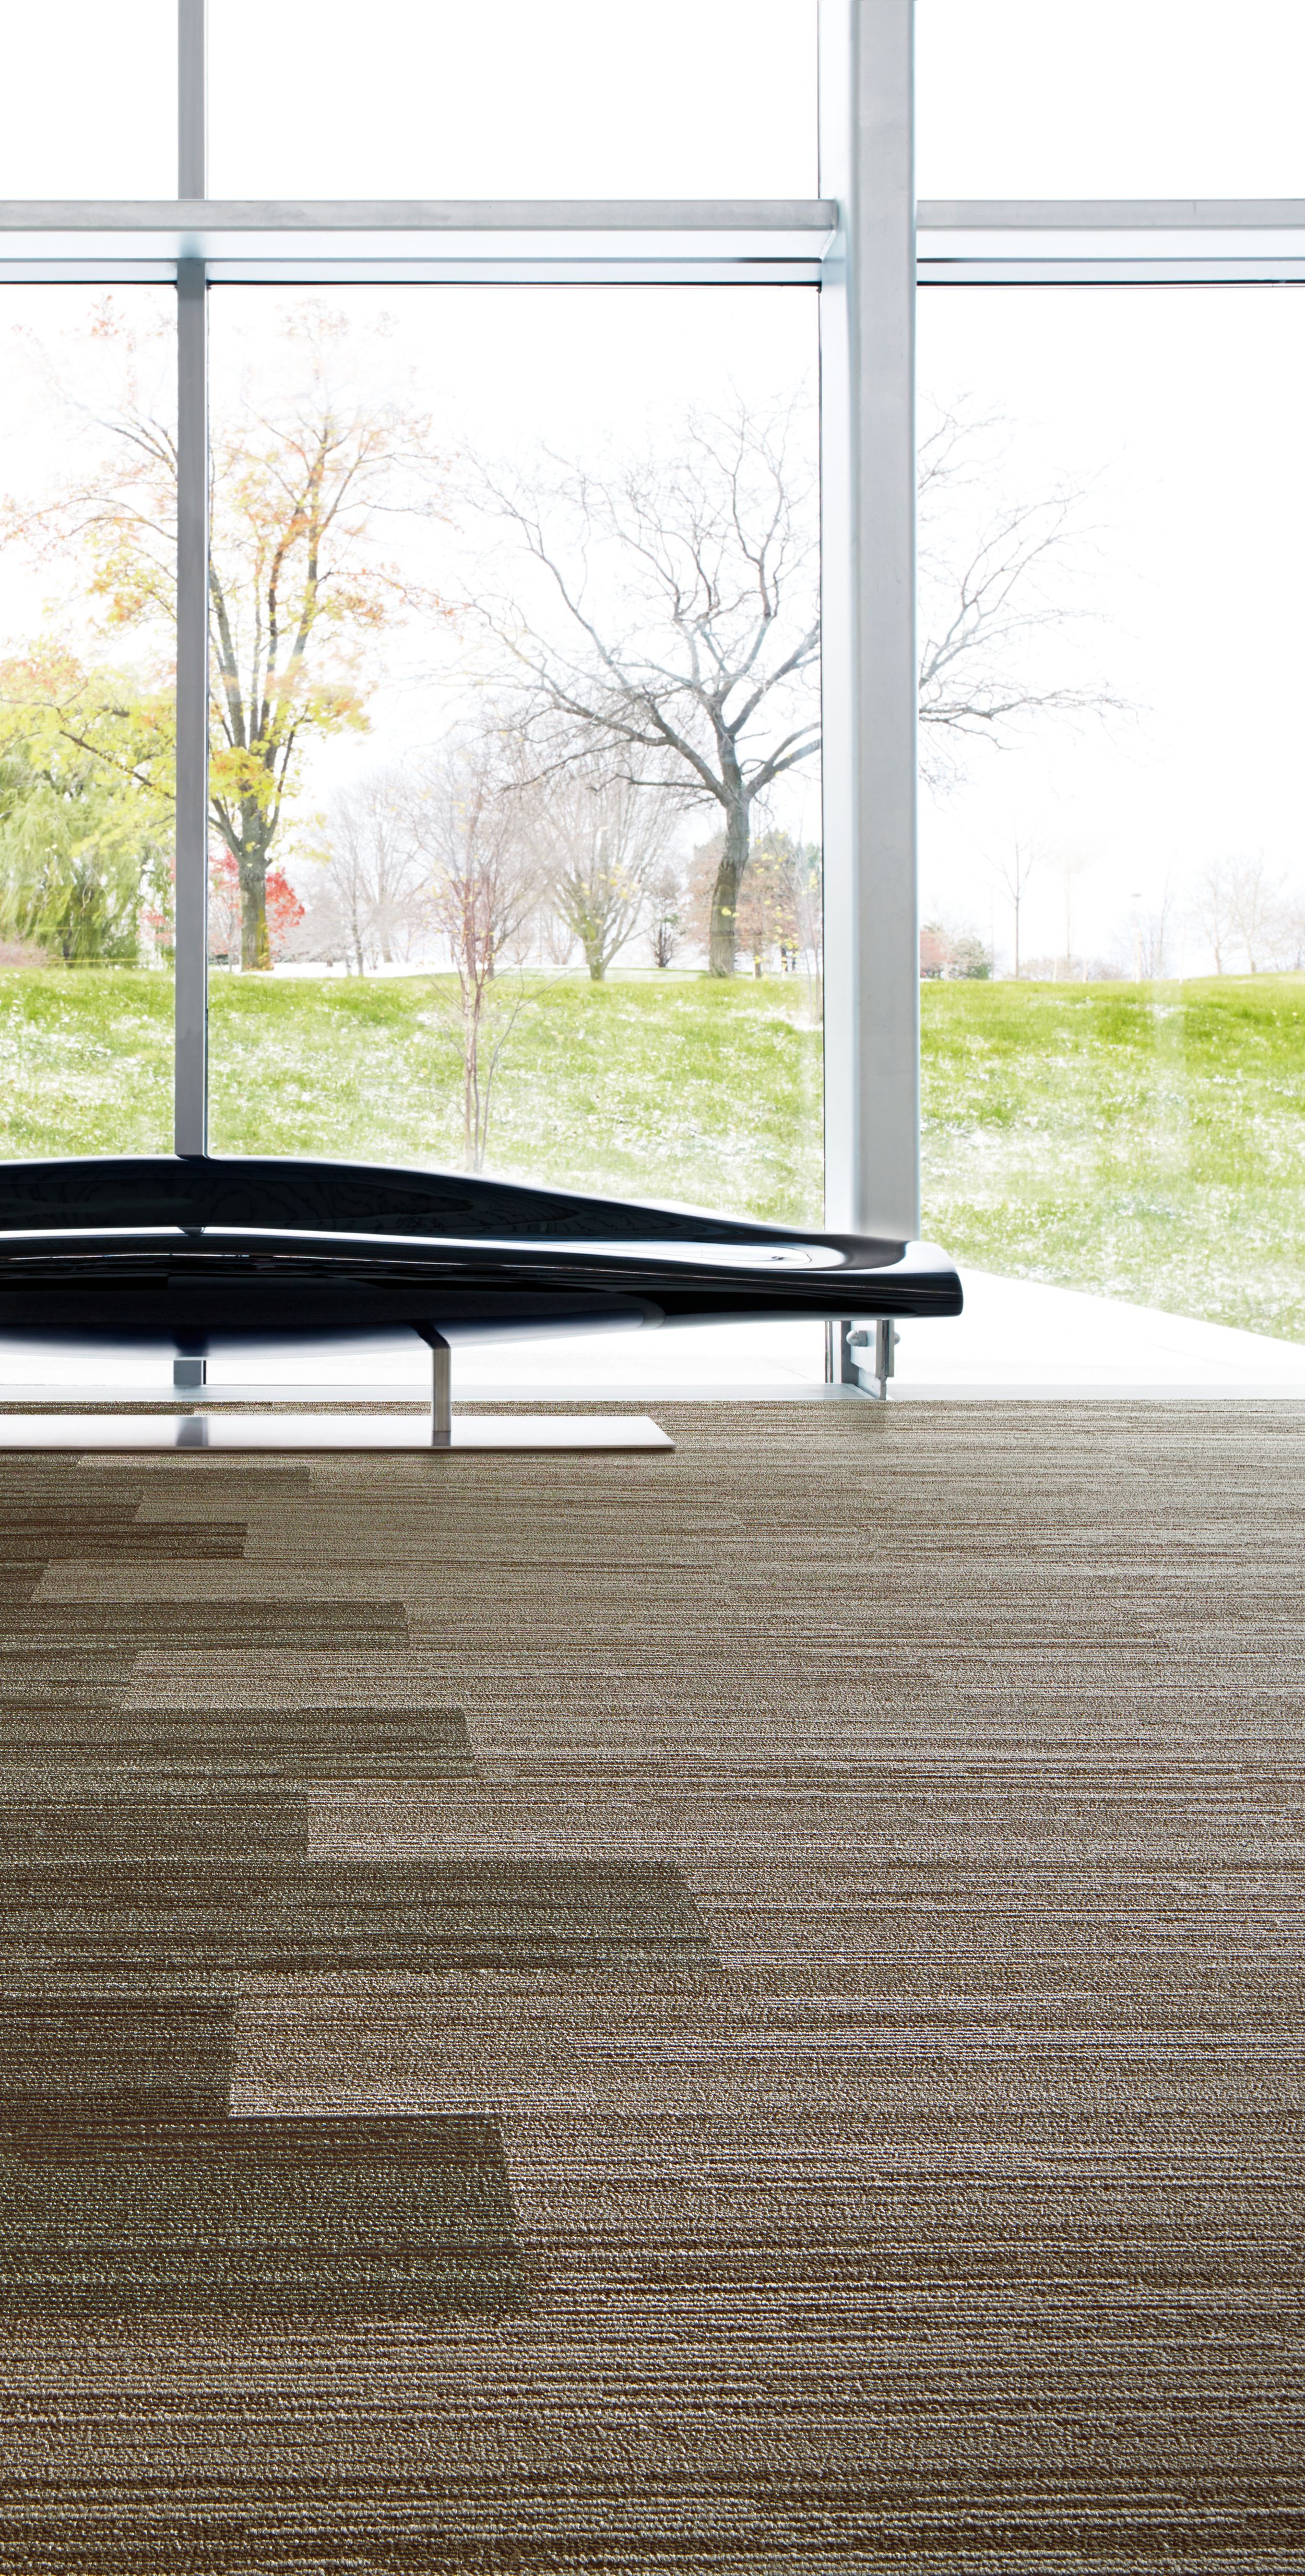 Interface Progression III plank carpet tile in room with seating area by window imagen número 5